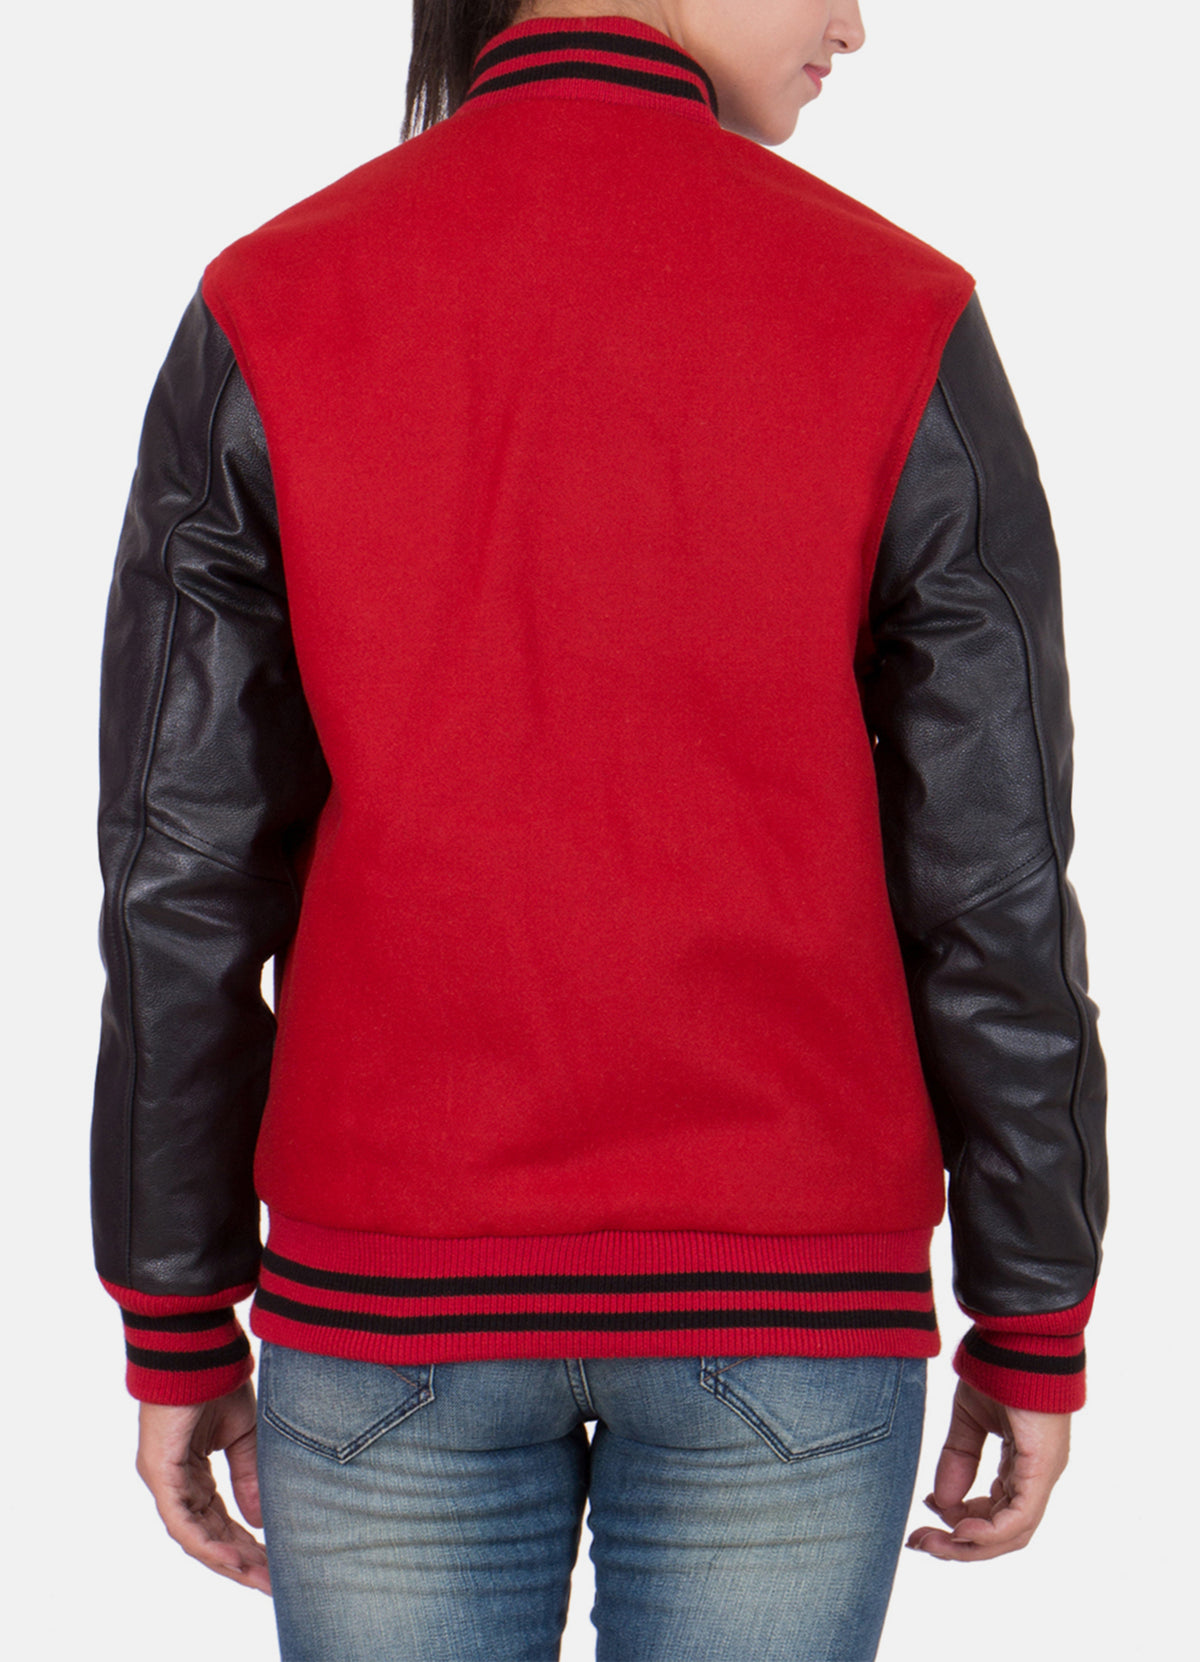 Womens Exclusive Red and Black Varsity Jacket